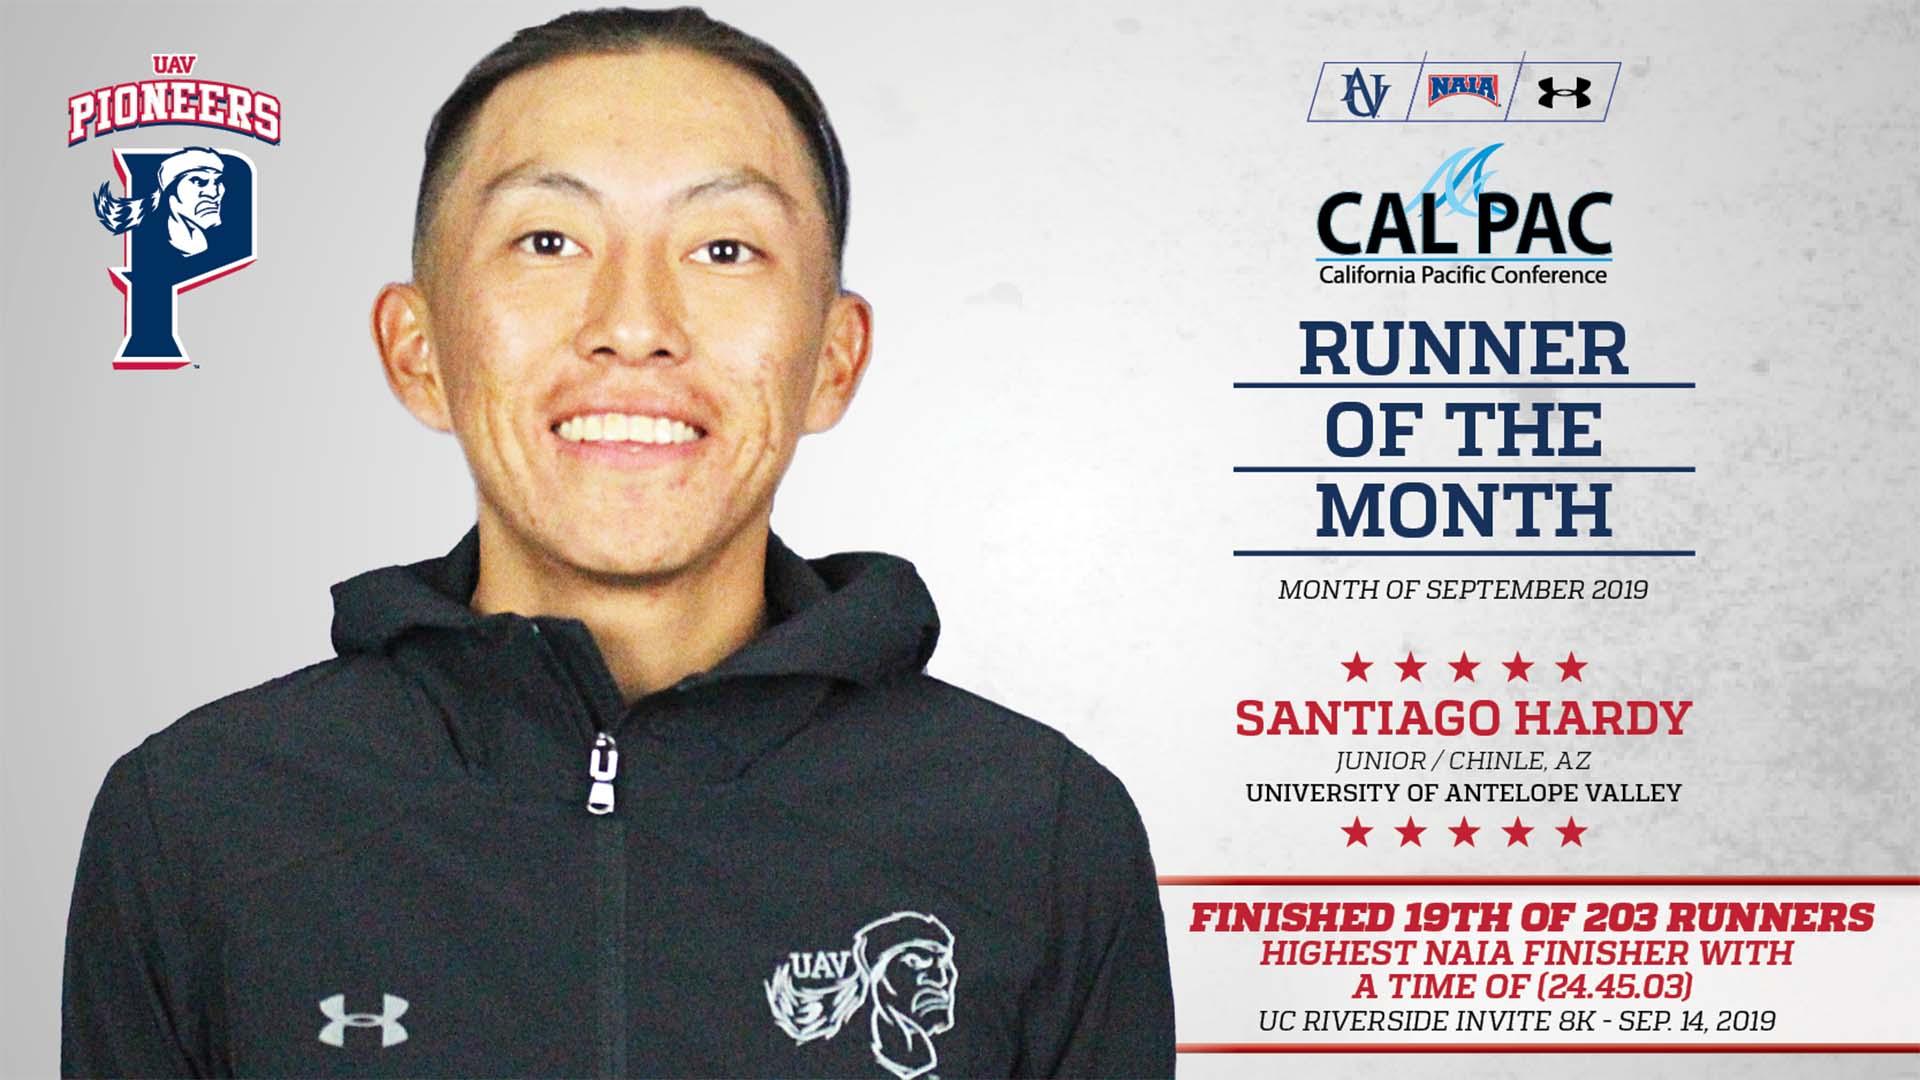 University of Antelope Valley  junior Santiago Hardy (Navajo) has been named Cal Pac Runner of the Month